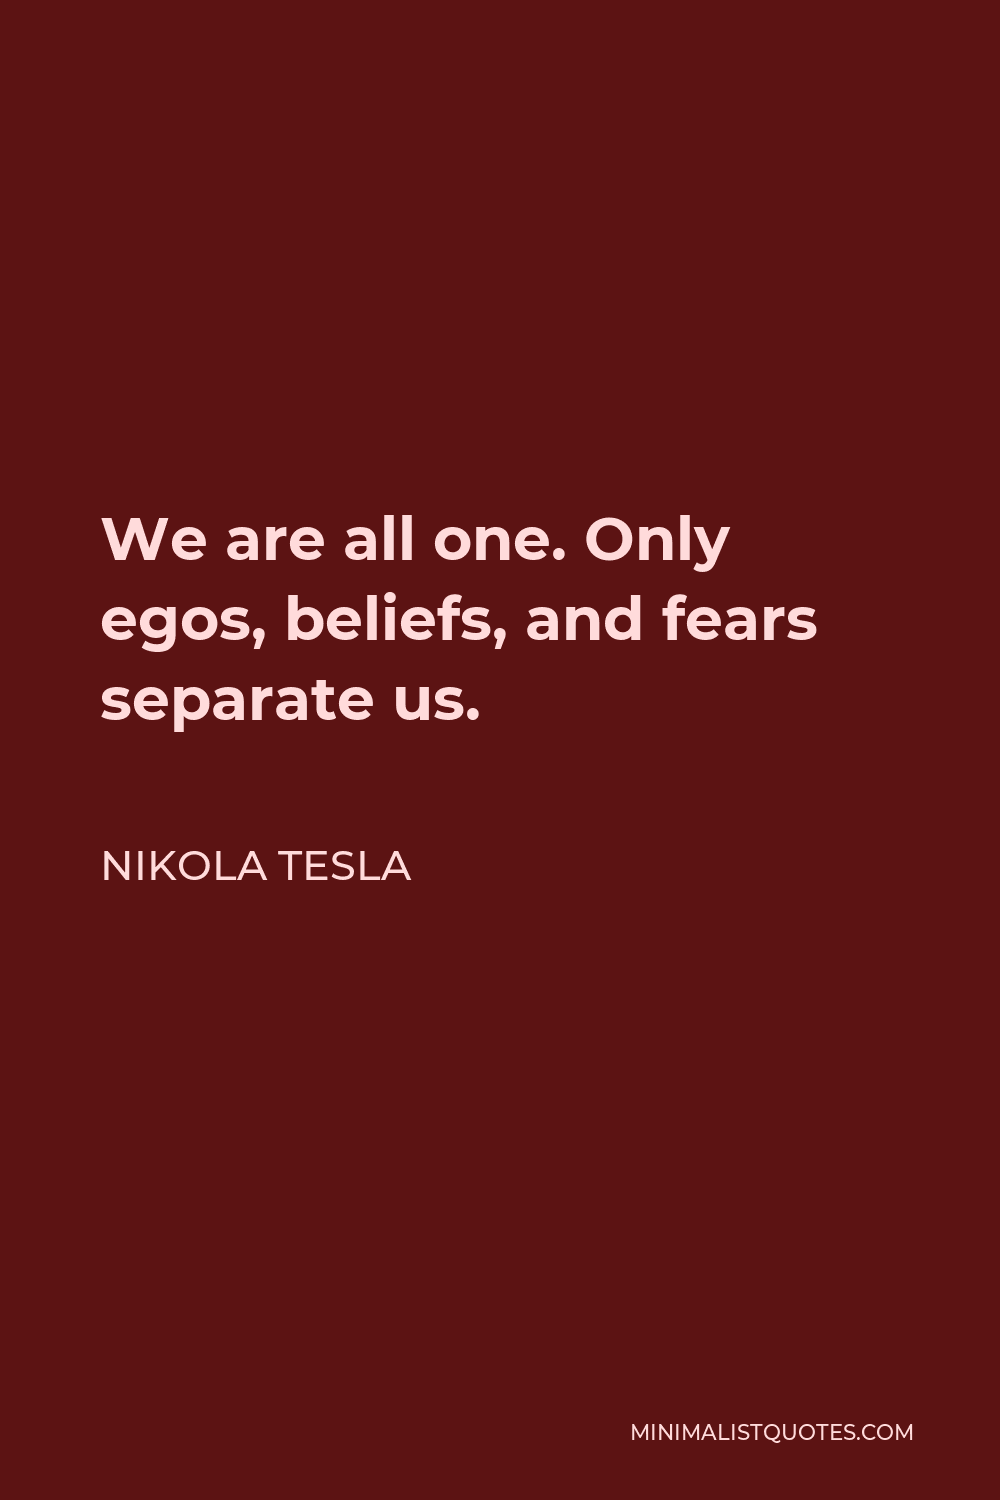 Nikola Tesla Quote - We are all one. Only egos, beliefs, and fears separate us.